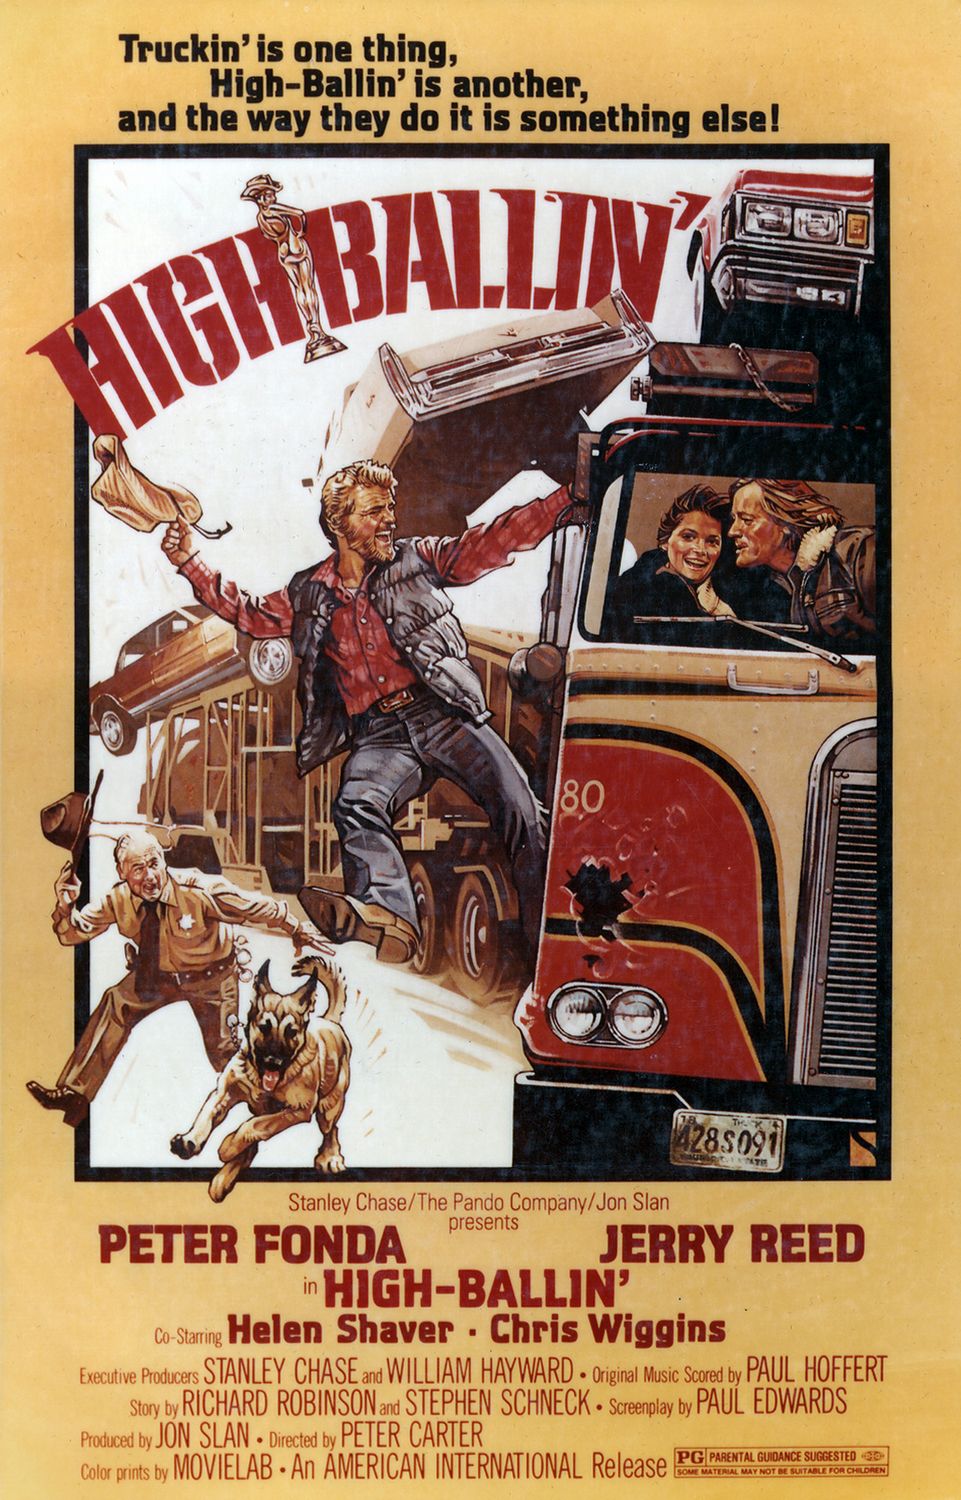 high ballin movie poster - Truckin'is one thing, HighBallin' is another, and the way they do it is something else! La Ballin Stanley ChaseThe Pando CompanyJon Slan presents Peter Fonda Jerry Reed in HighBallin' CoStarring Helen Shaver . Chris Wiggins Exec